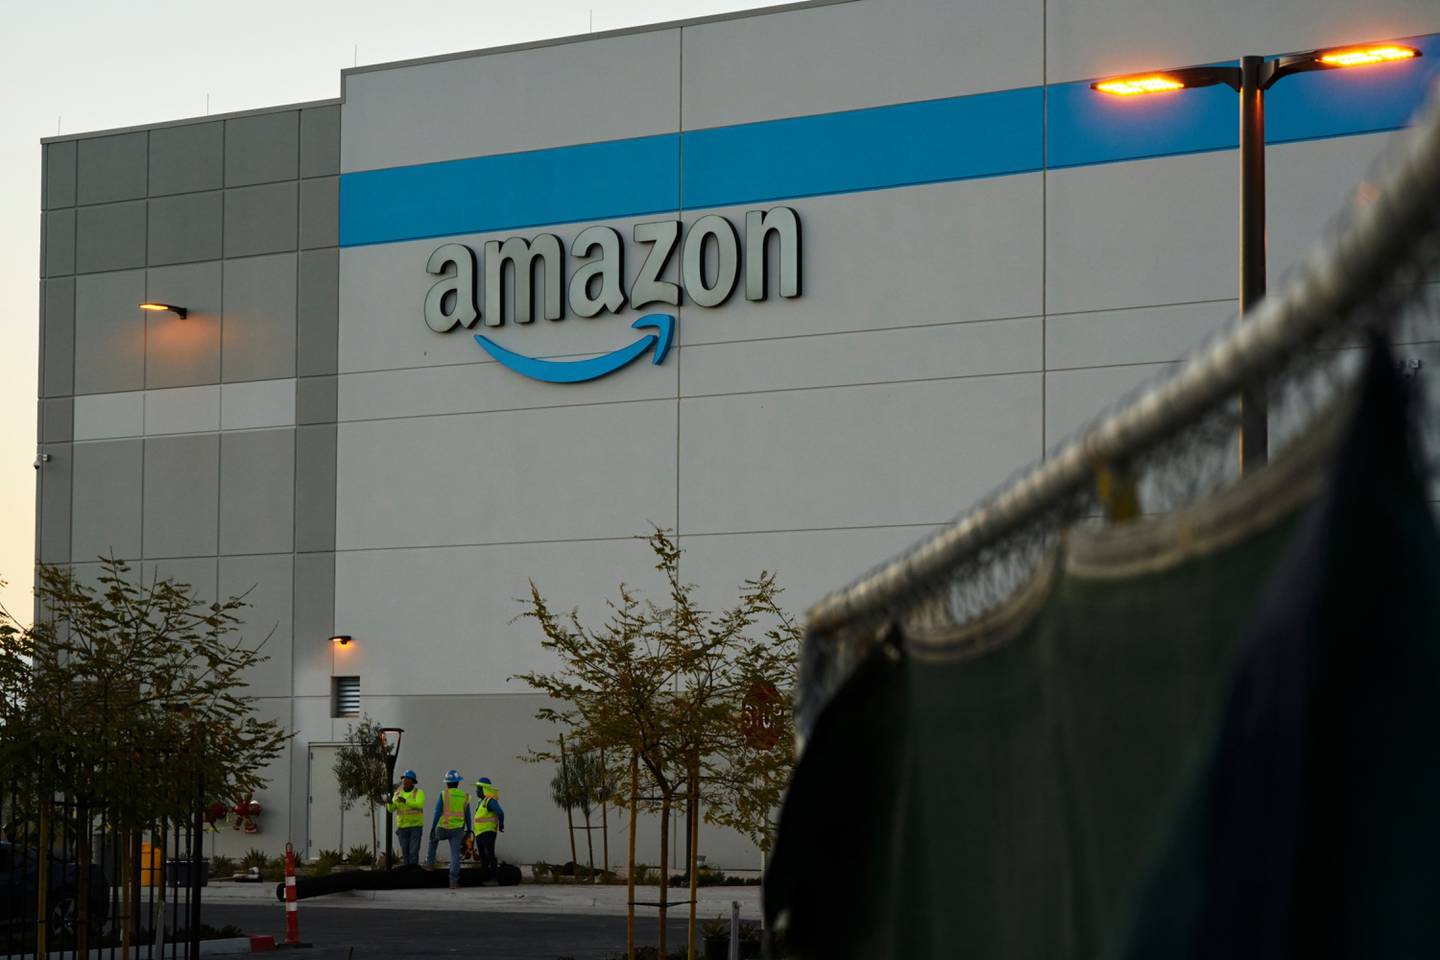 Workers outside an Amazon sort center under construction in San Diego on March 9.dfd